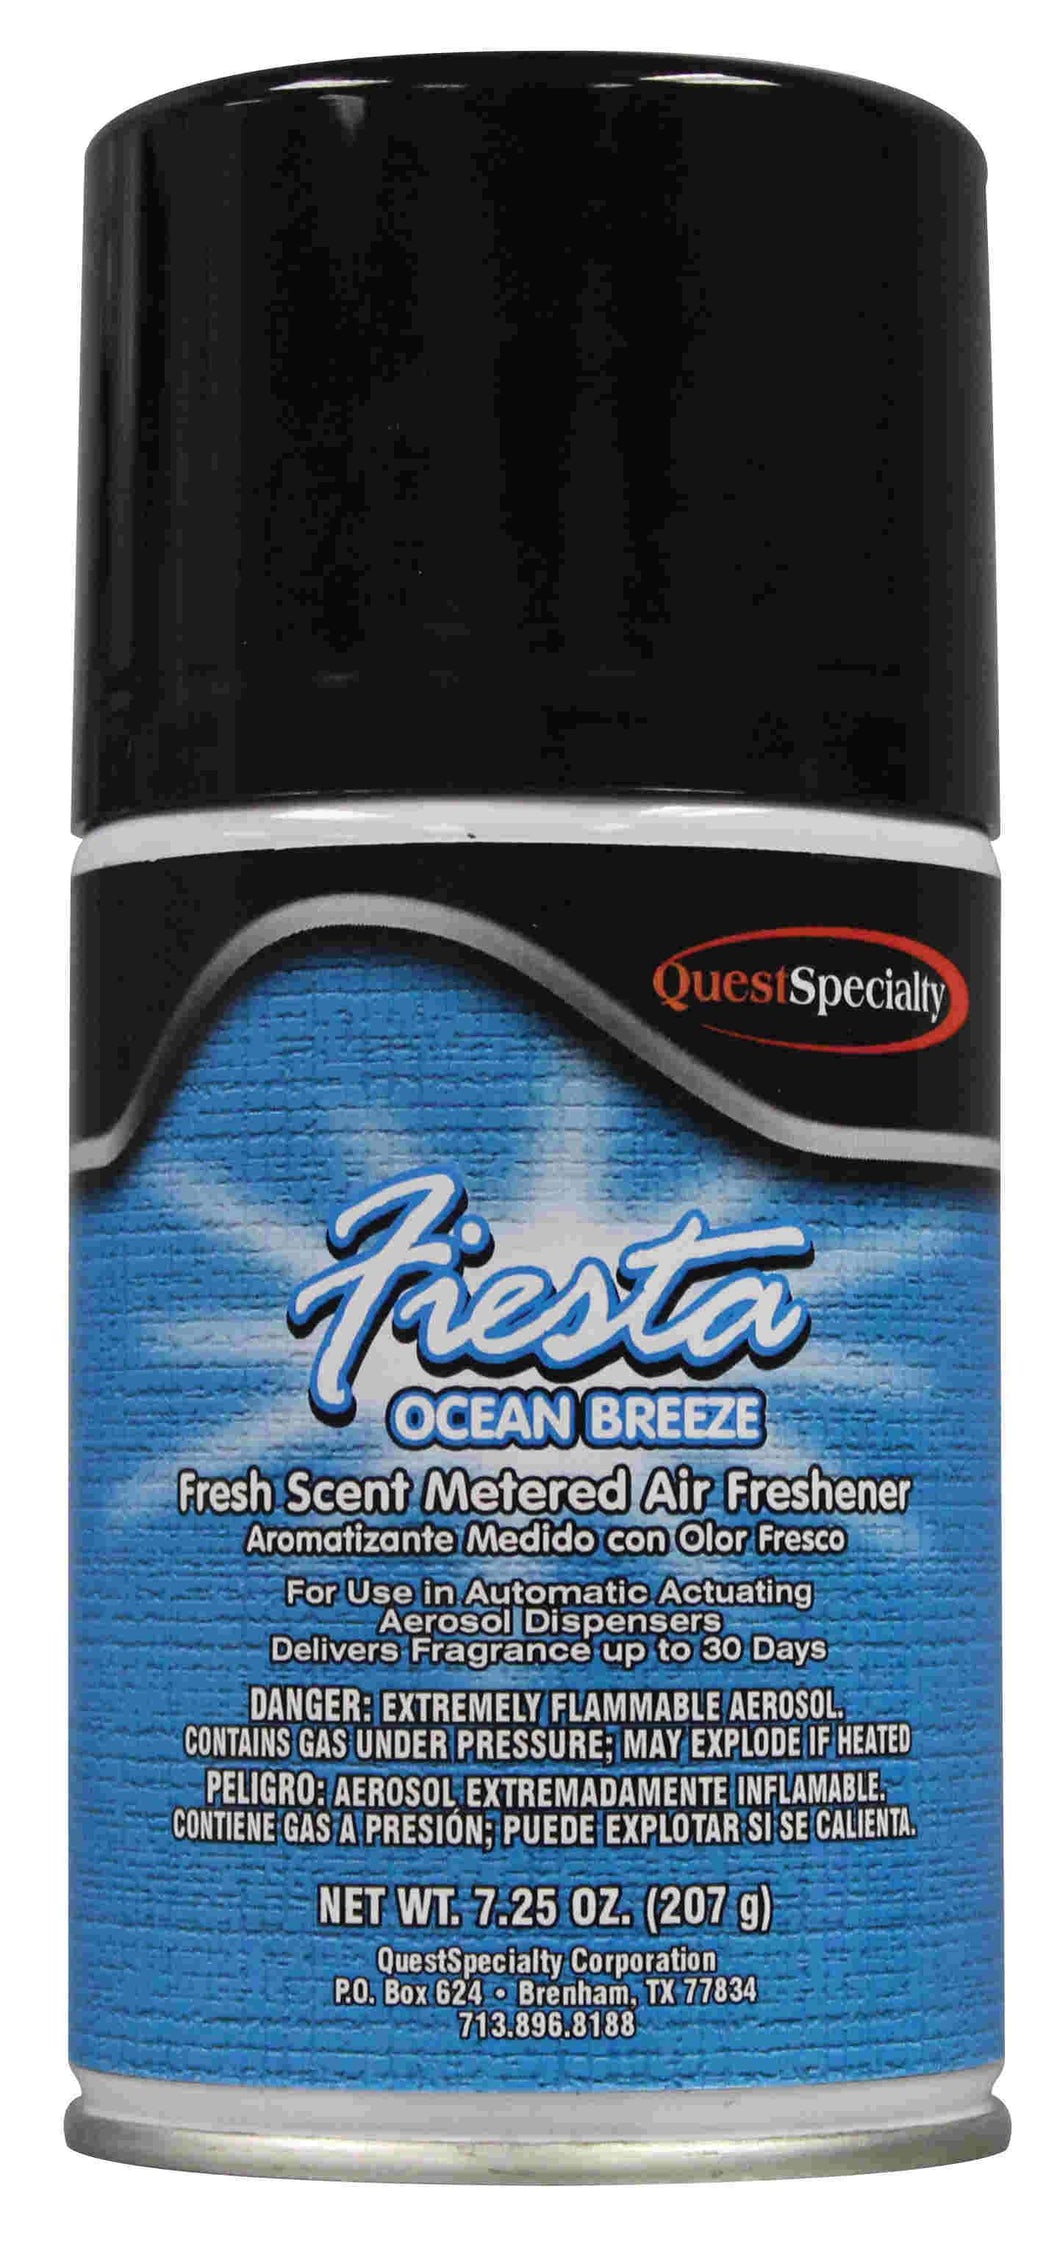 Automatic Air Freshener Spray Refill, Fiesta Ocean Breeze, 7.25 oz Can, QuestSpecialty, Pack of 12